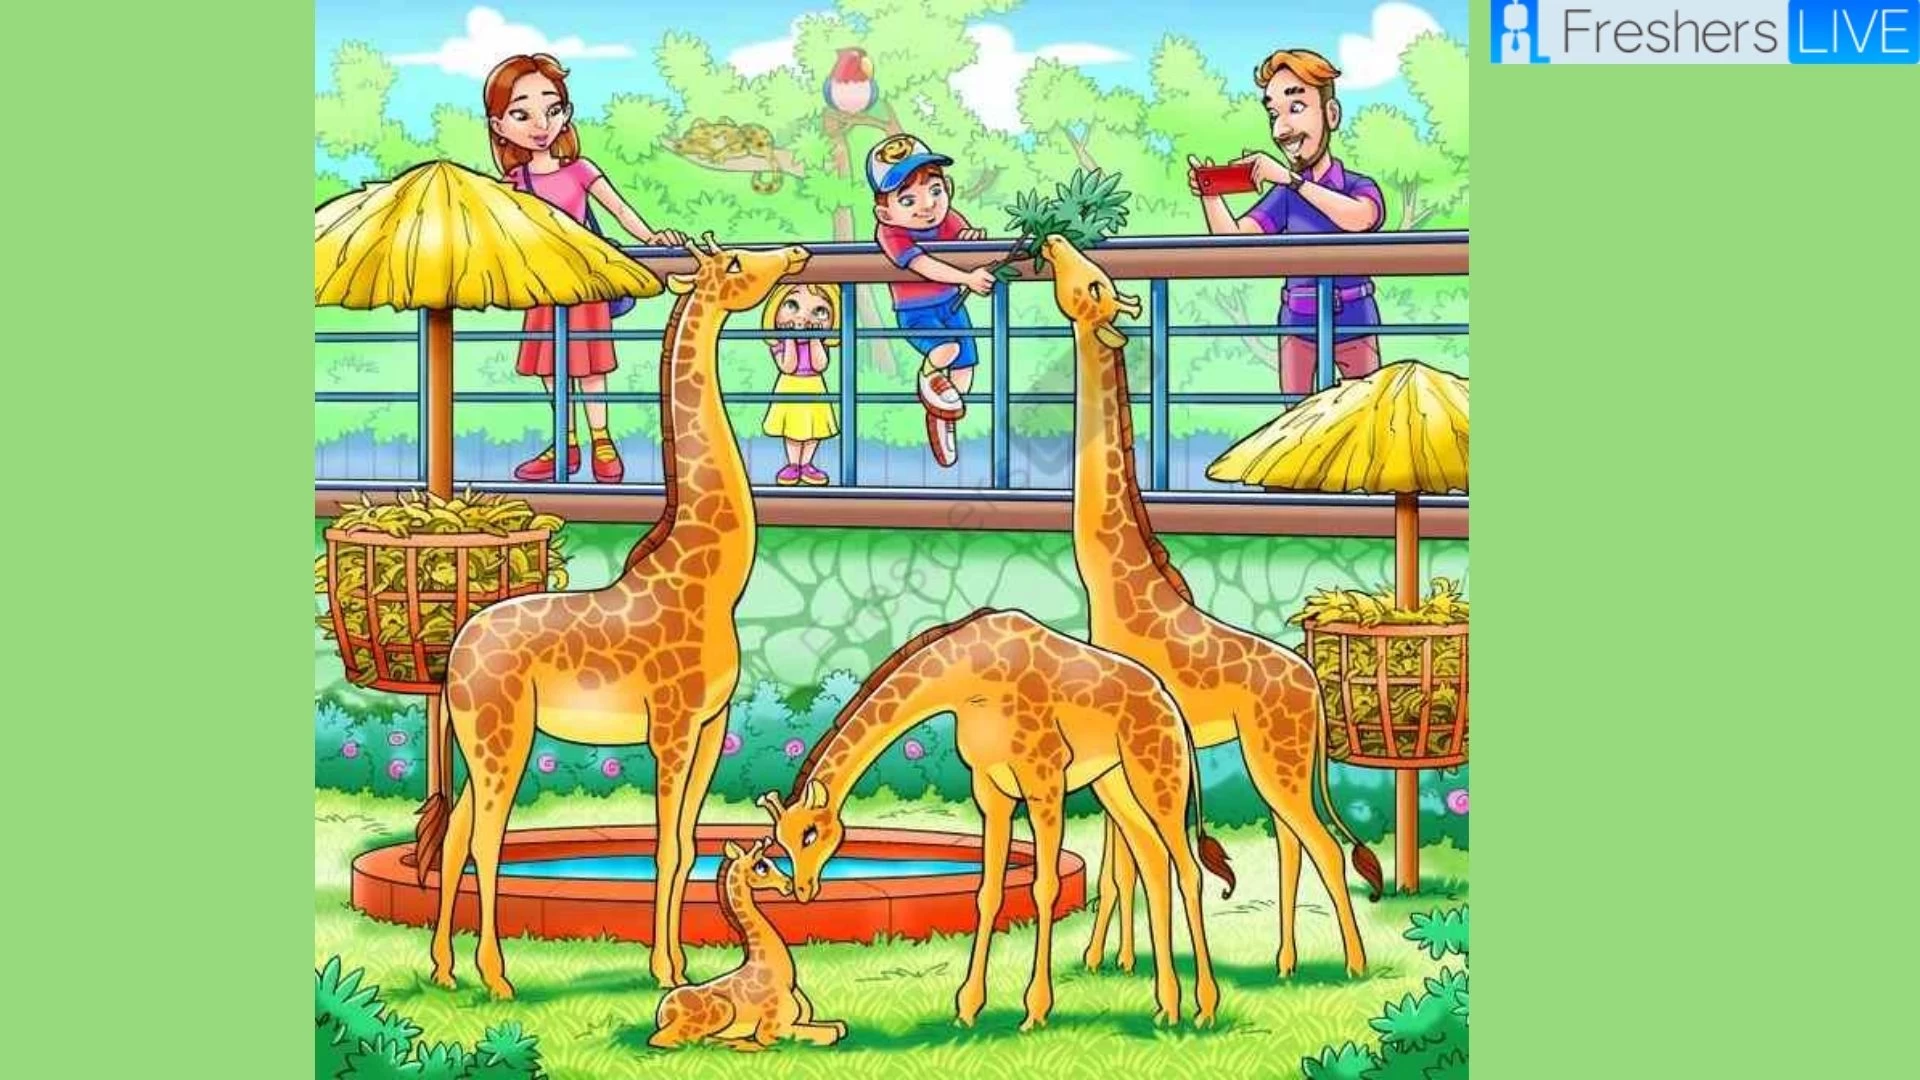 Only 5% Can Spot A Monkey Hidden Inside The Zoo Picture In Less Than 6 Seconds!